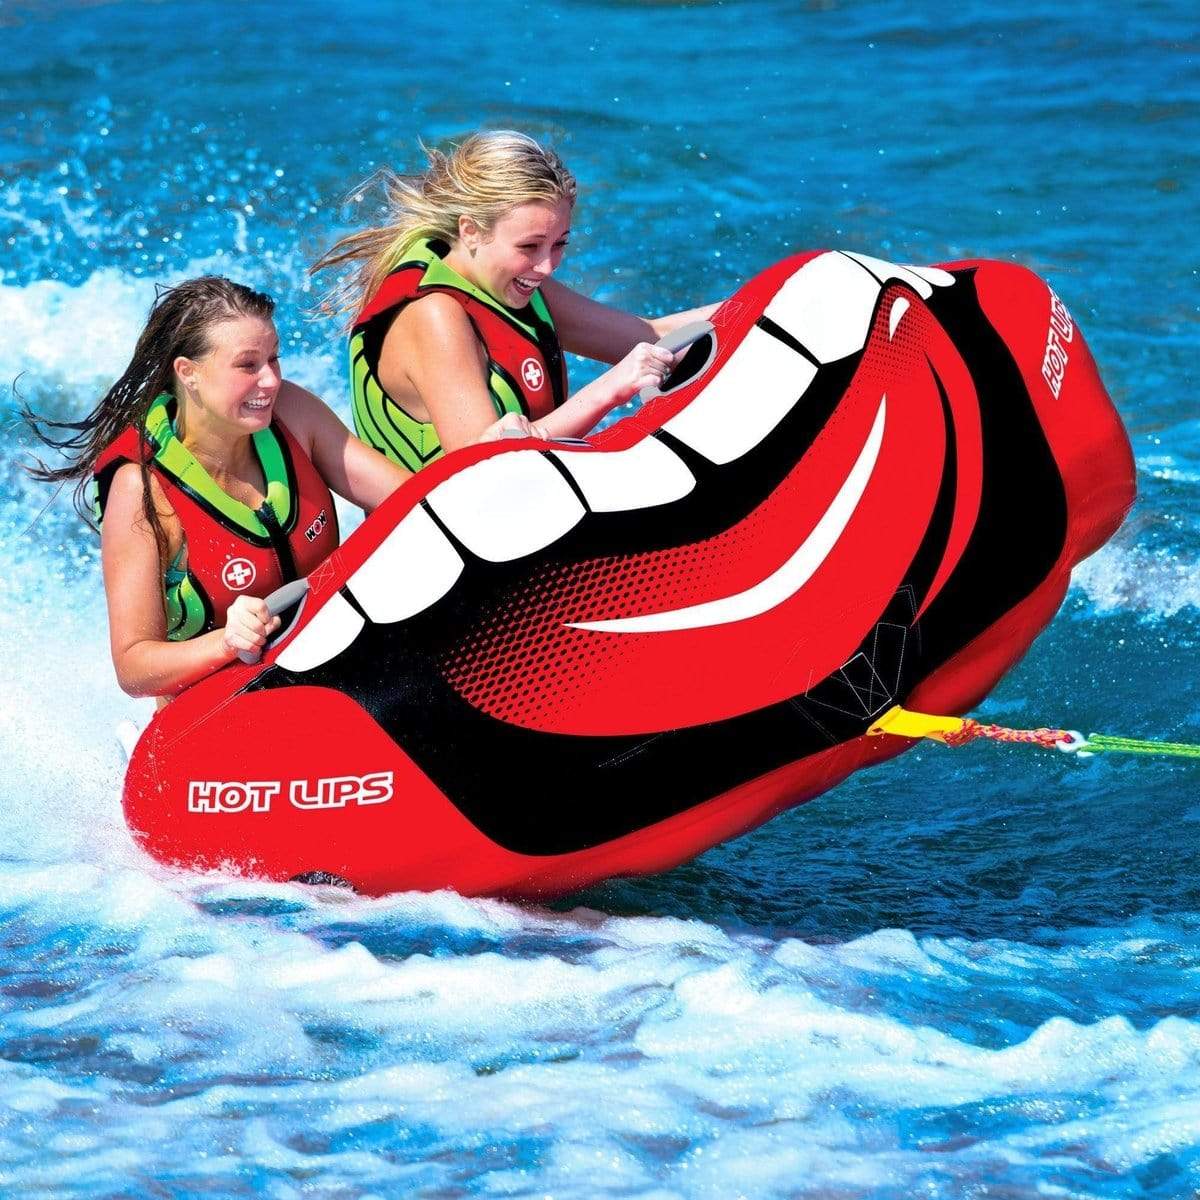 WOW World Of Watersports Qualifies for Free Shipping WOW World Of Watersports Hot Lips #15-1100